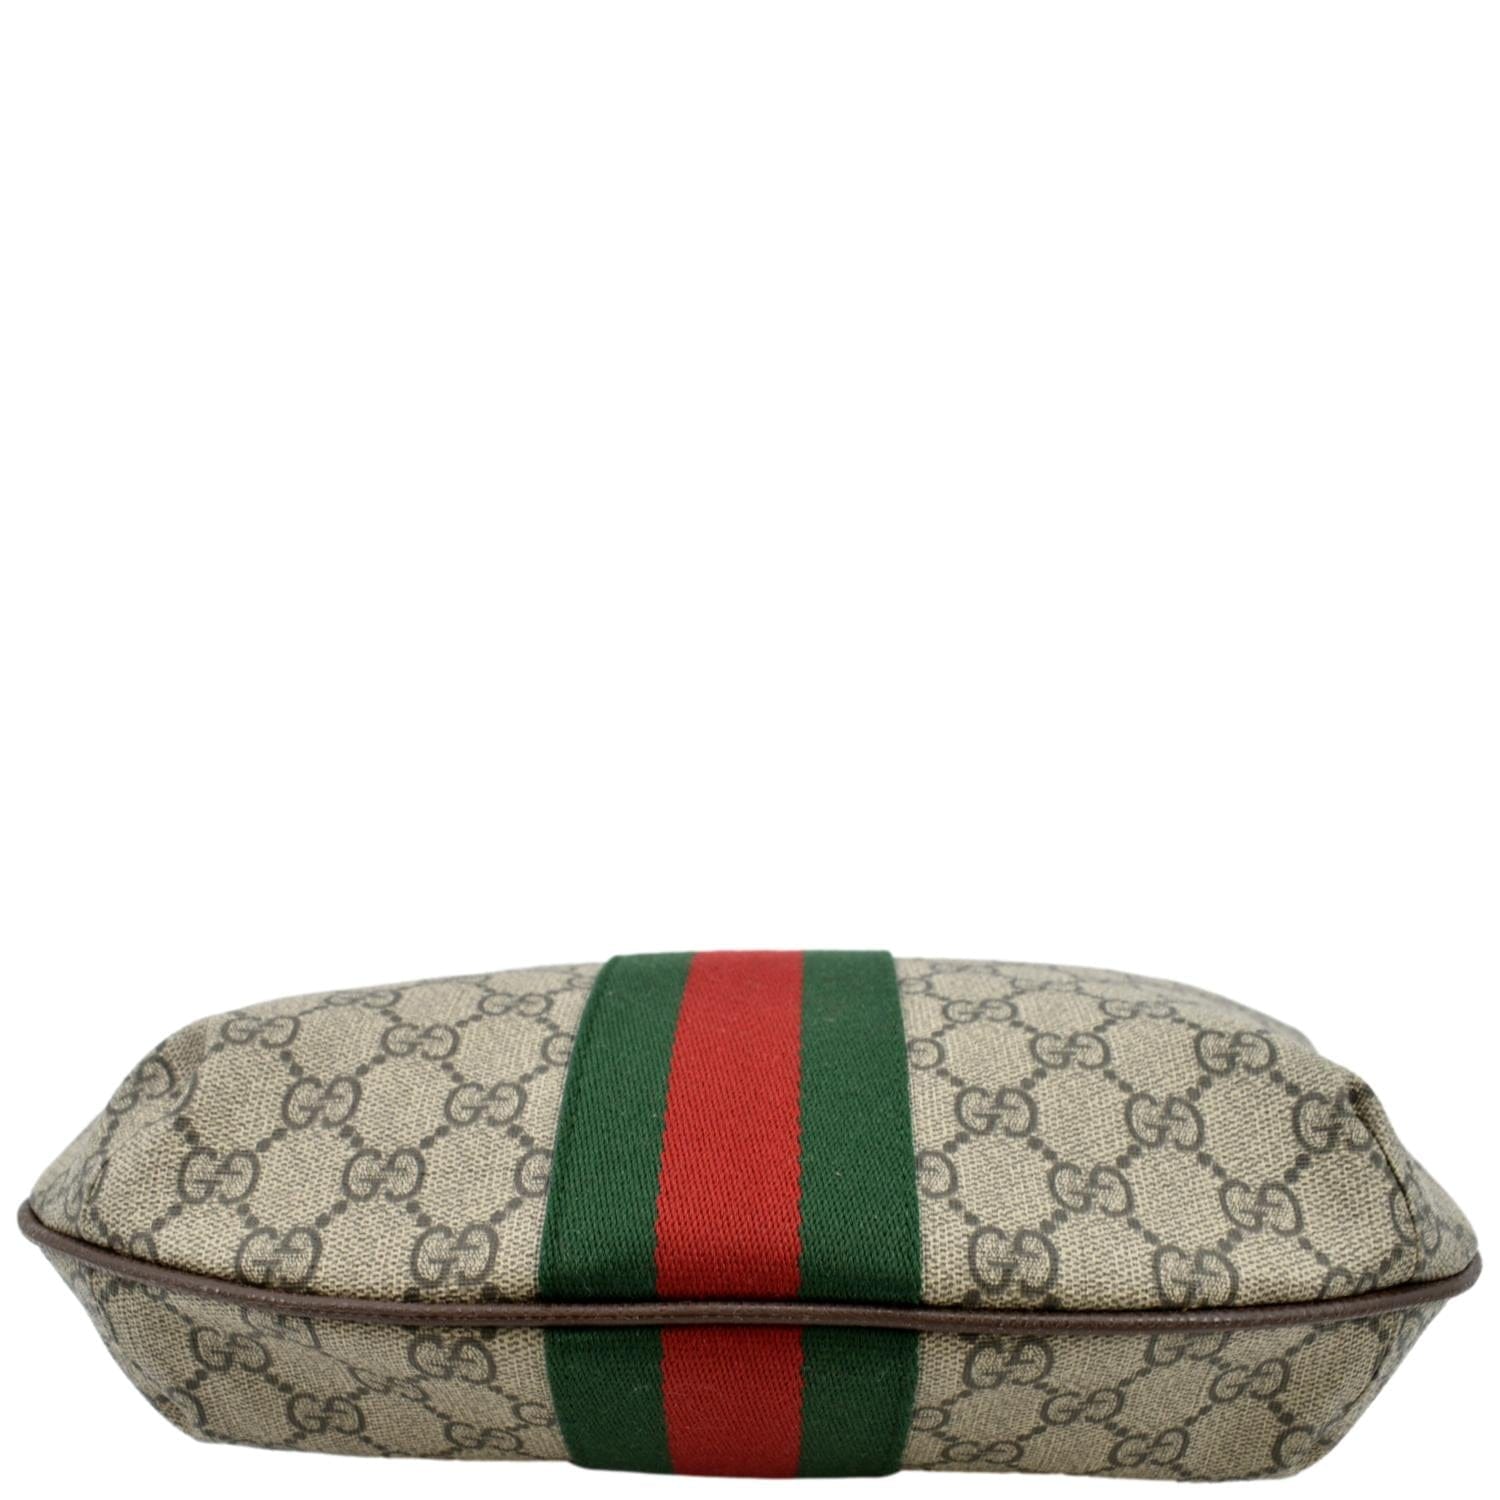 Ophidia GG Small Canvas Belt Bag in Beige - Gucci